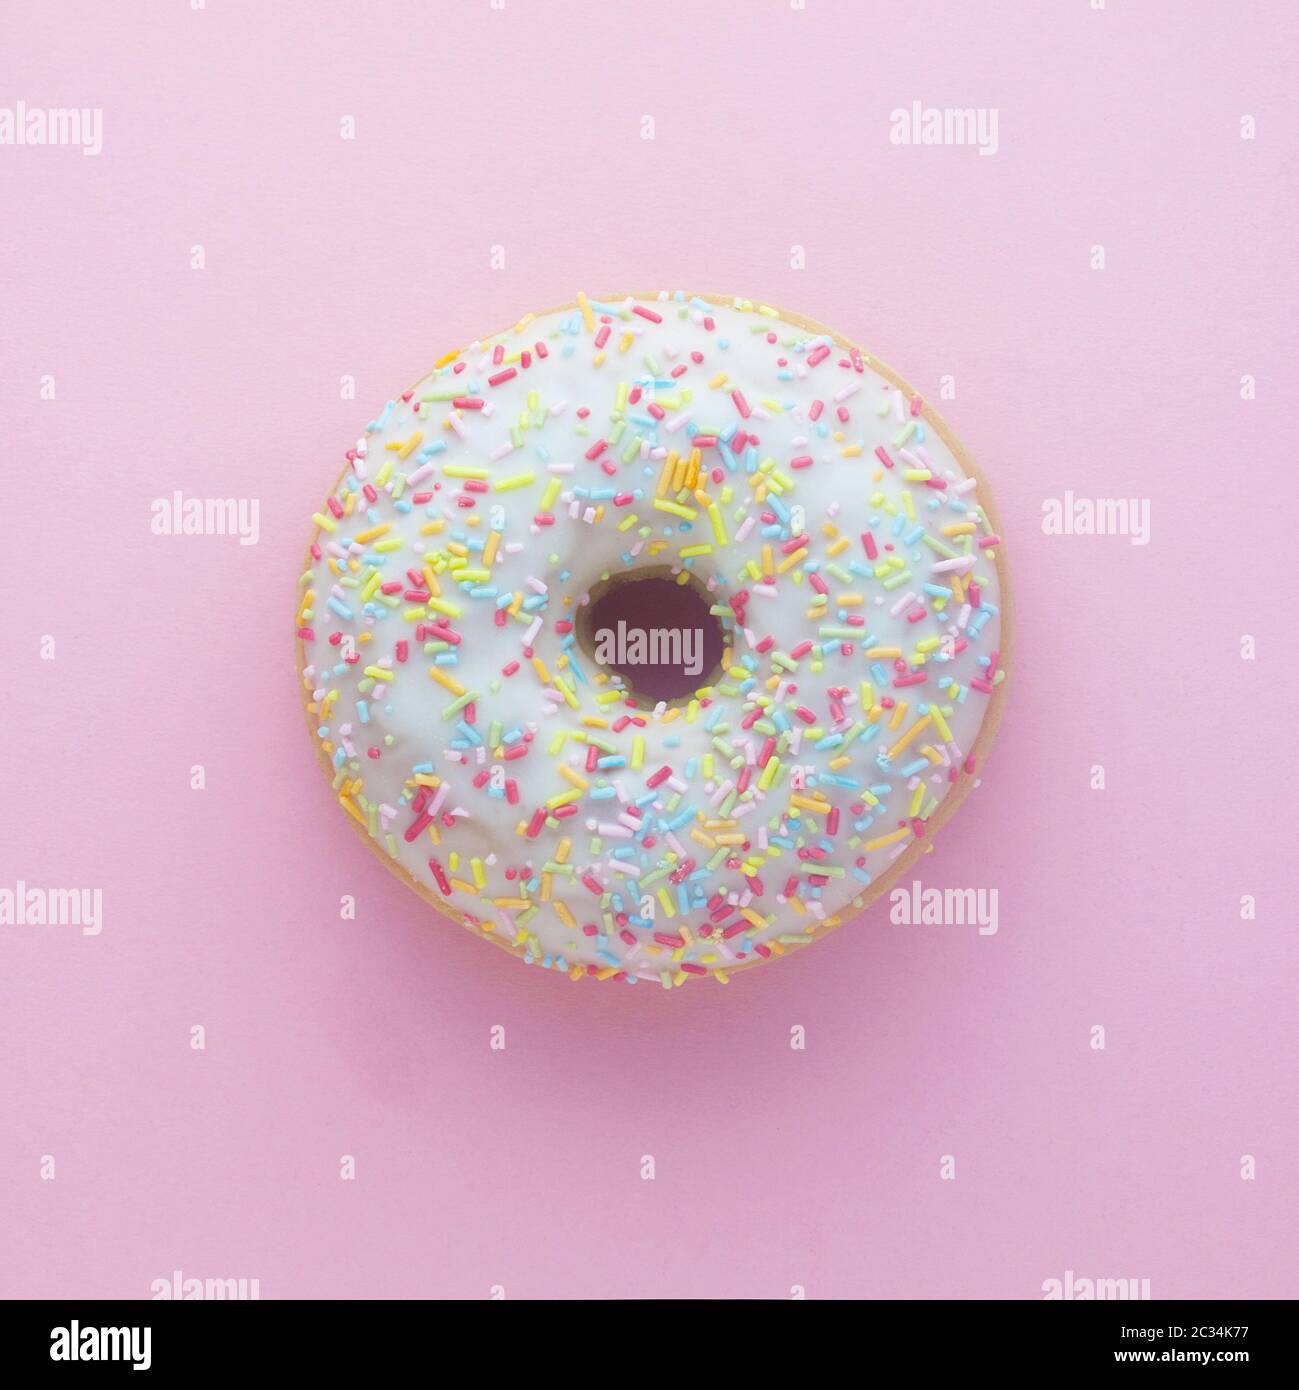 Top View Of A Doughnut On A Pink Background Stock Photo